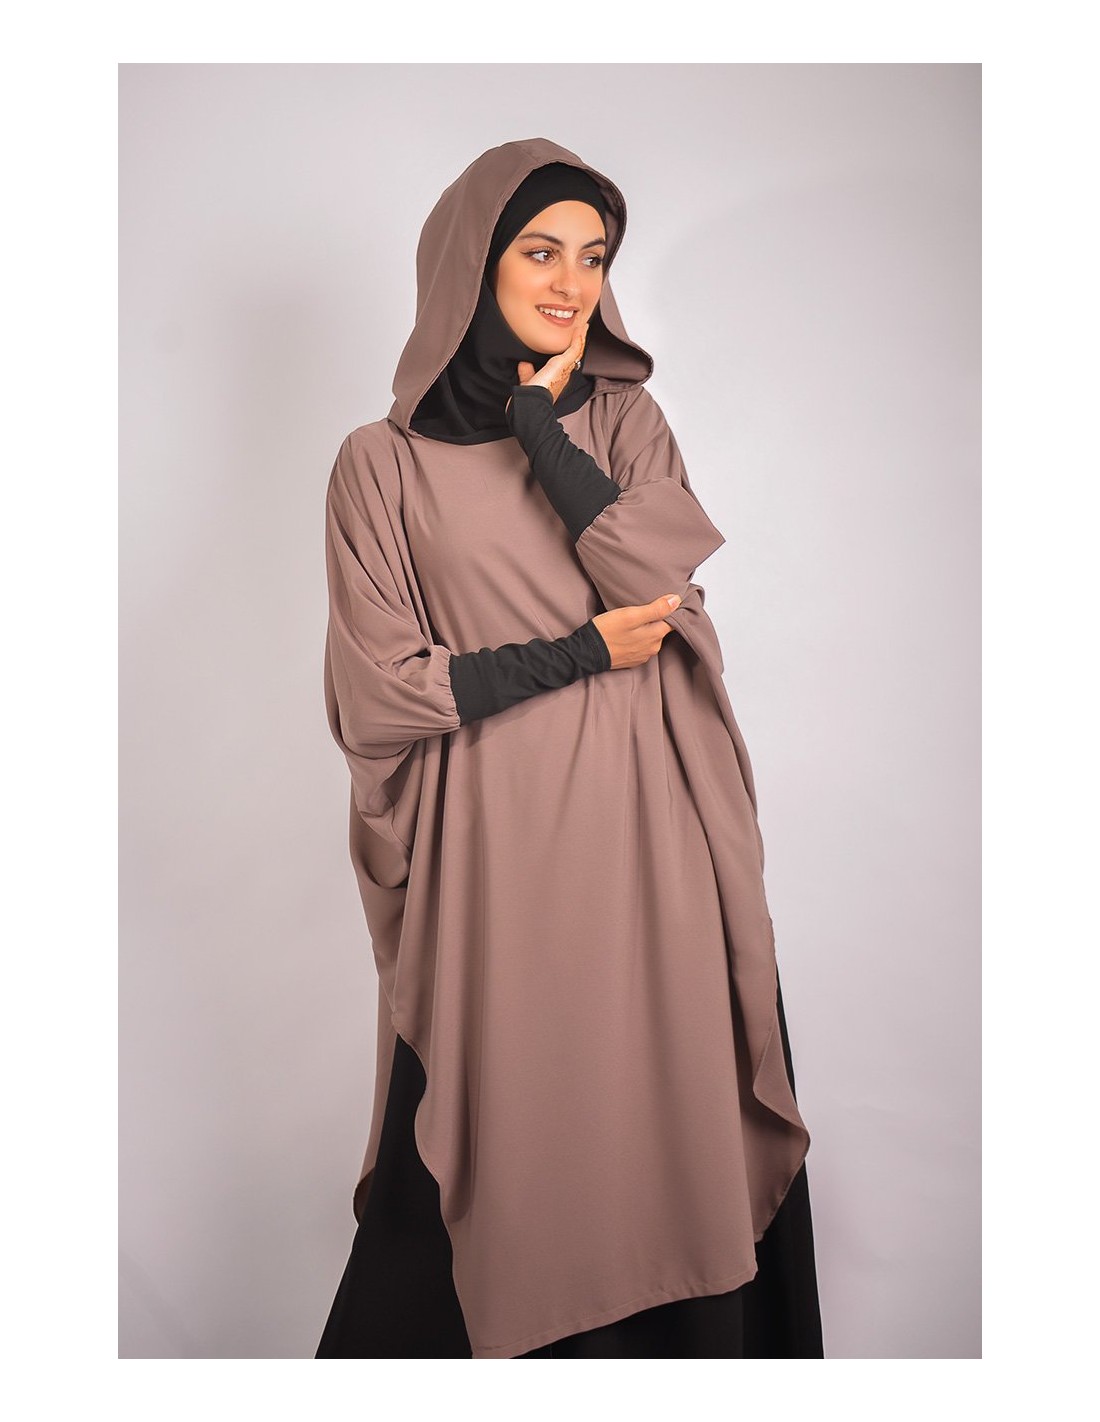 Young tunic: hijab and built-in hood